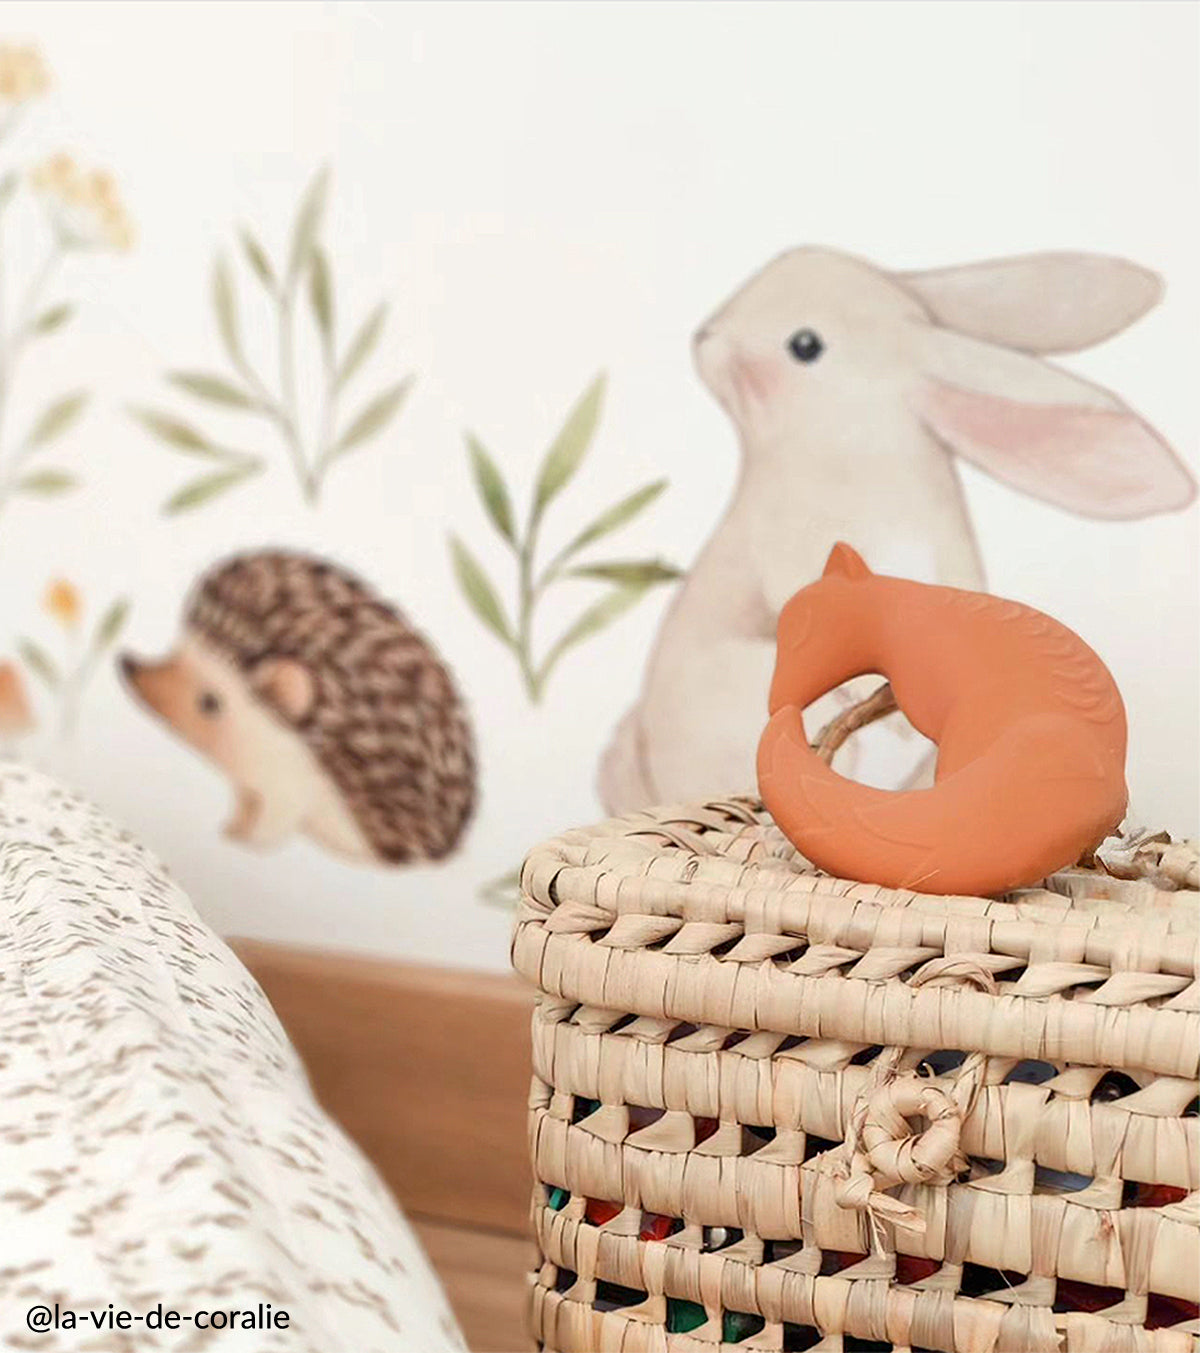 FOREST - Wall decals murals - Rabbits